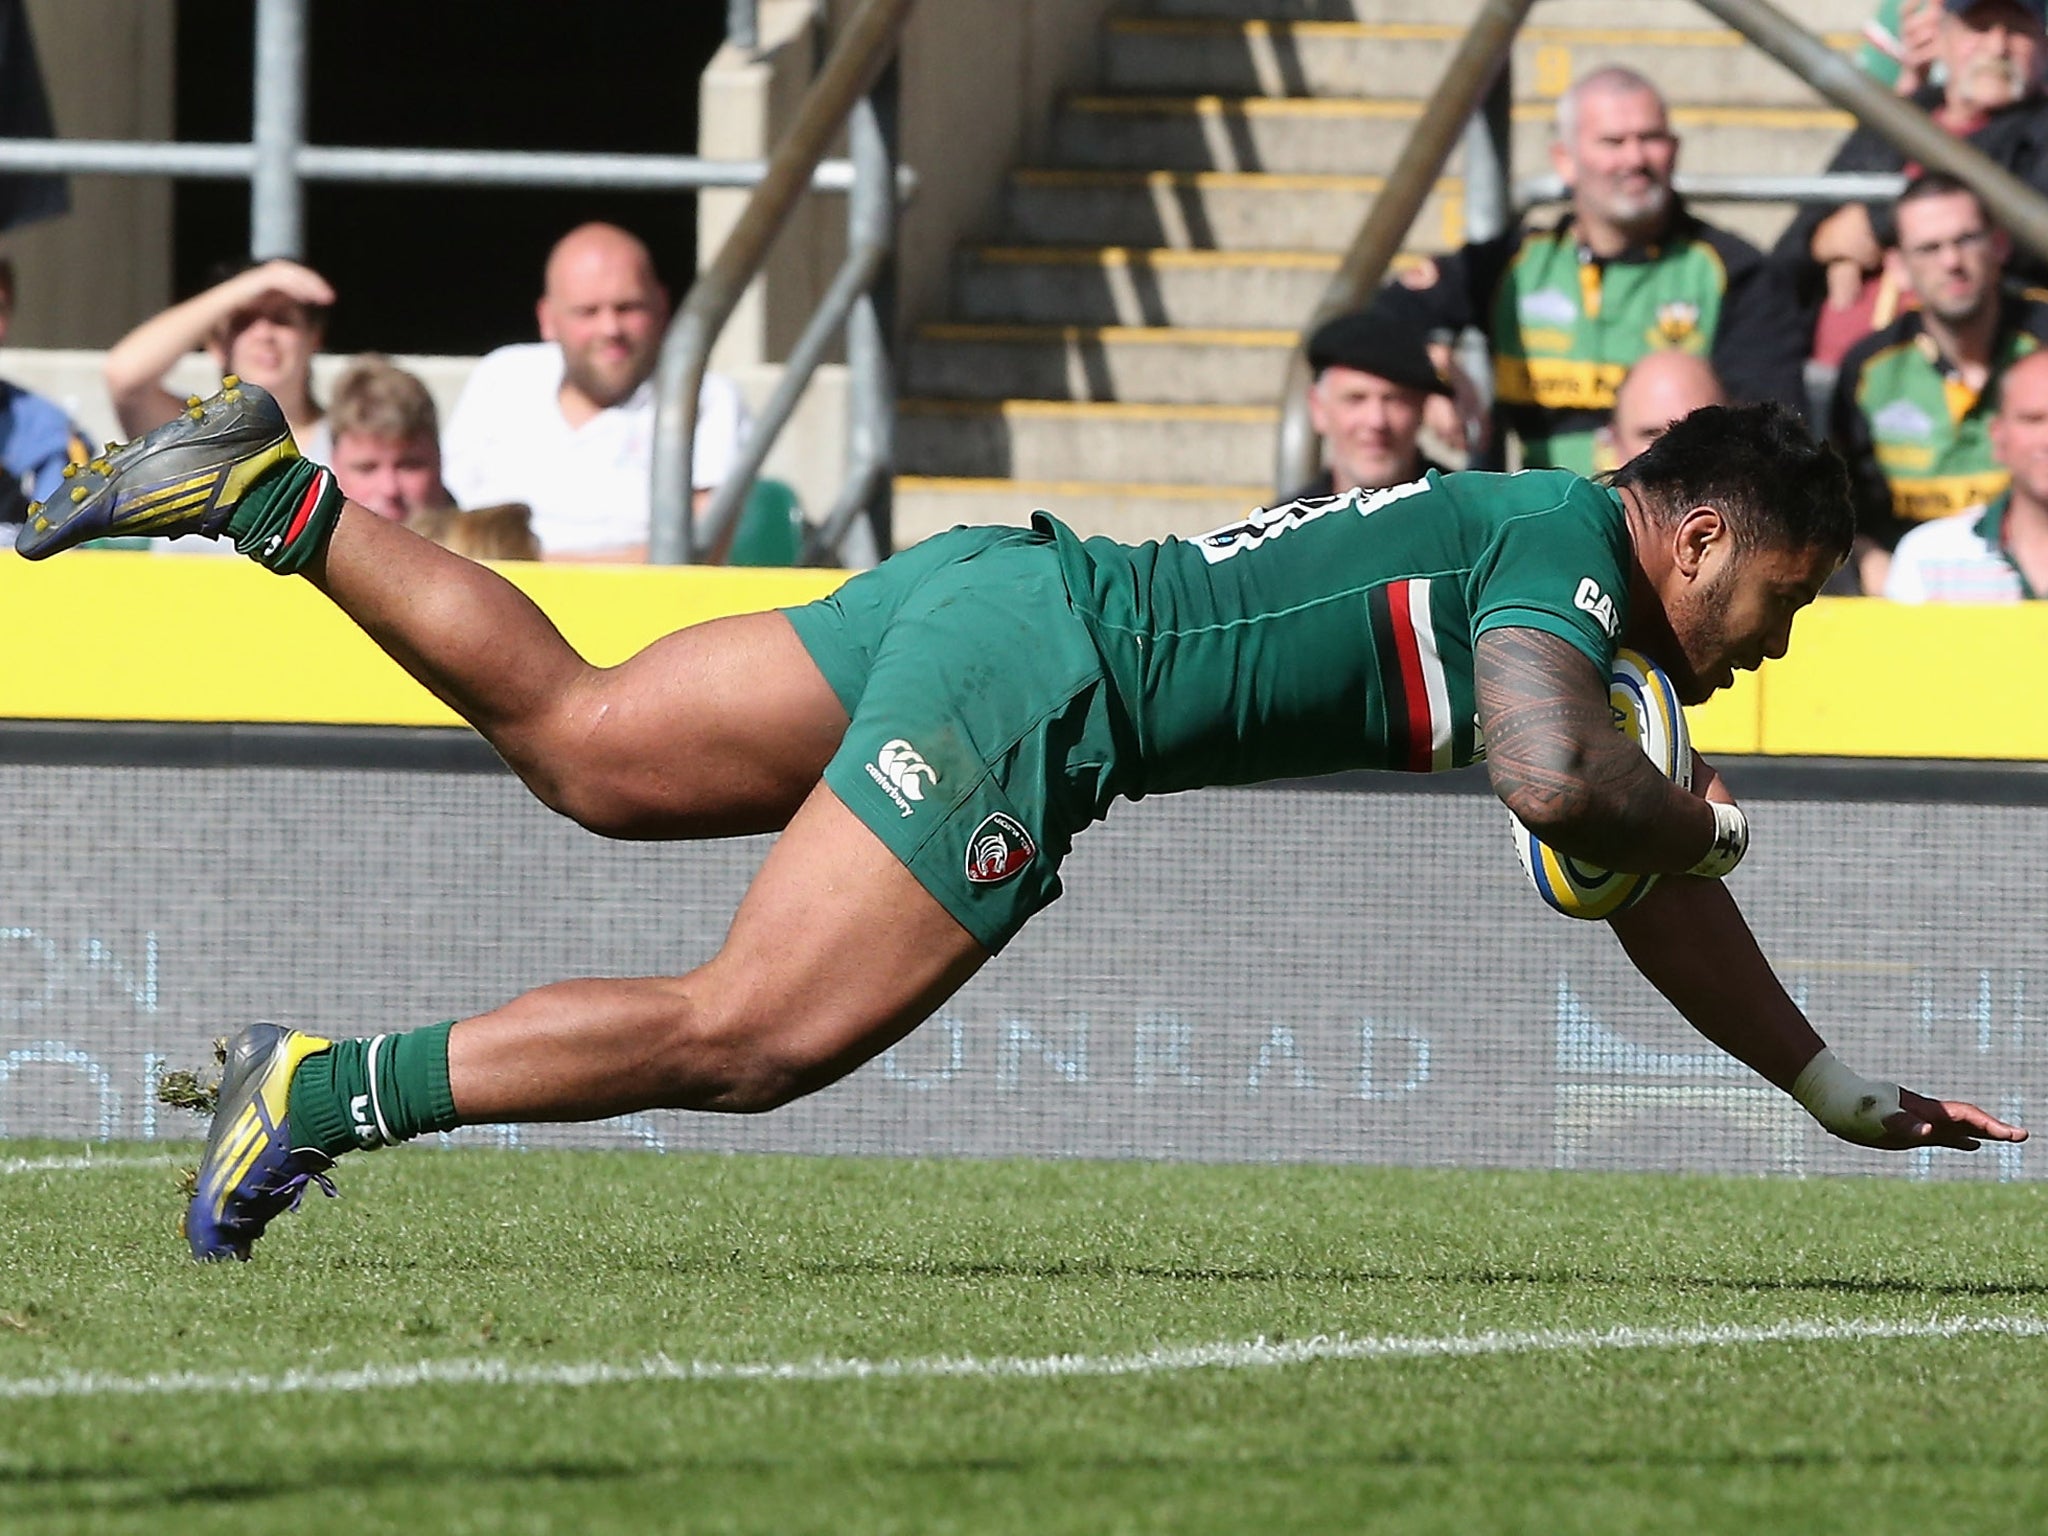 Manu Tuilagi has had an eventful week, but will return to the pitch to face Newcastle